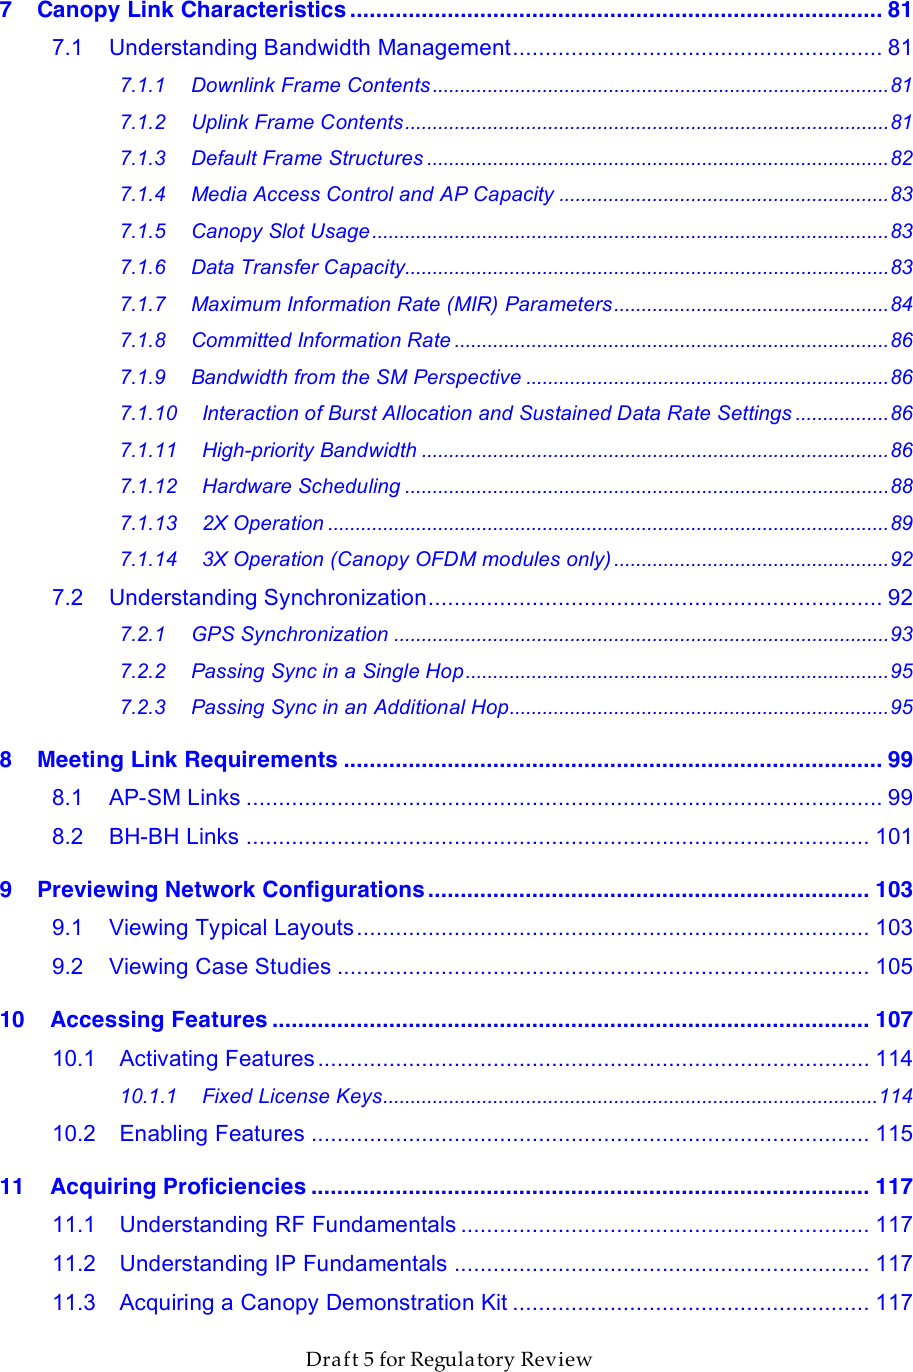                  March 200                  Through Software Release 6.       Draft 5 for Regulatory Review 7 Canopy Link Characteristics .................................................................................. 81 7.1 Understanding Bandwidth Management......................................................... 81 7.1.1 Downlink Frame Contents...................................................................................81 7.1.2 Uplink Frame Contents........................................................................................81 7.1.3 Default Frame Structures ....................................................................................82 7.1.4 Media Access Control and AP Capacity ............................................................83 7.1.5 Canopy Slot Usage..............................................................................................83 7.1.6 Data Transfer Capacity........................................................................................83 7.1.7 Maximum Information Rate (MIR) Parameters..................................................84 7.1.8 Committed Information Rate ...............................................................................86 7.1.9 Bandwidth from the SM Perspective ..................................................................86 7.1.10 Interaction of Burst Allocation and Sustained Data Rate Settings .................86 7.1.11 High-priority Bandwidth .....................................................................................86 7.1.12 Hardware Scheduling ........................................................................................88 7.1.13 2X Operation ......................................................................................................89 7.1.14 3X Operation (Canopy OFDM modules only) ..................................................92 7.2 Understanding Synchronization...................................................................... 92 7.2.1 GPS Synchronization ..........................................................................................93 7.2.2 Passing Sync in a Single Hop.............................................................................95 7.2.3 Passing Sync in an Additional Hop.....................................................................95 8 Meeting Link Requirements ................................................................................... 99 8.1 AP-SM Links .................................................................................................. 99 8.2 BH-BH Links ................................................................................................ 101 9 Previewing Network Configurations .................................................................... 103 9.1 Viewing Typical Layouts............................................................................... 103 9.2 Viewing Case Studies .................................................................................. 105 10 Accessing Features ............................................................................................ 107 10.1 Activating Features..................................................................................... 114 10.1.1 Fixed License Keys..........................................................................................114 10.2 Enabling Features ...................................................................................... 115 11 Acquiring Proficiencies ...................................................................................... 117 11.1 Understanding RF Fundamentals ............................................................... 117 11.2 Understanding IP Fundamentals ................................................................ 117 11.3 Acquiring a Canopy Demonstration Kit ....................................................... 117 